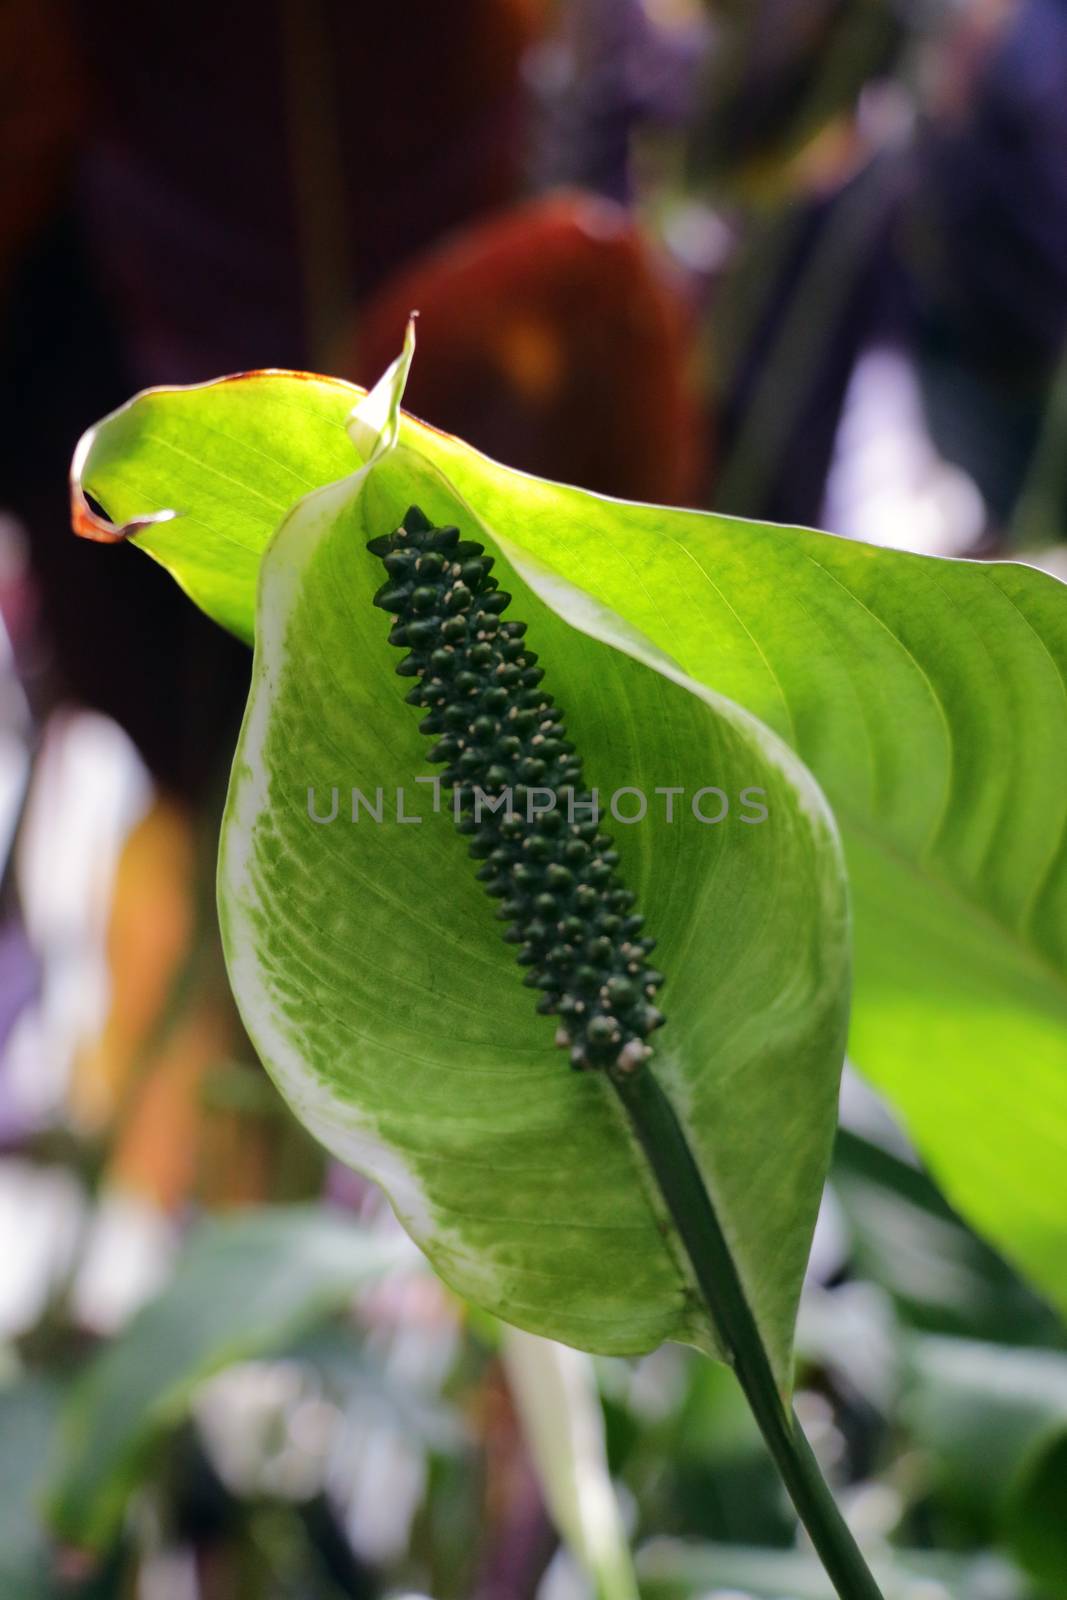 Anthurium, plants as ornamental can be placed indoor and outdoor